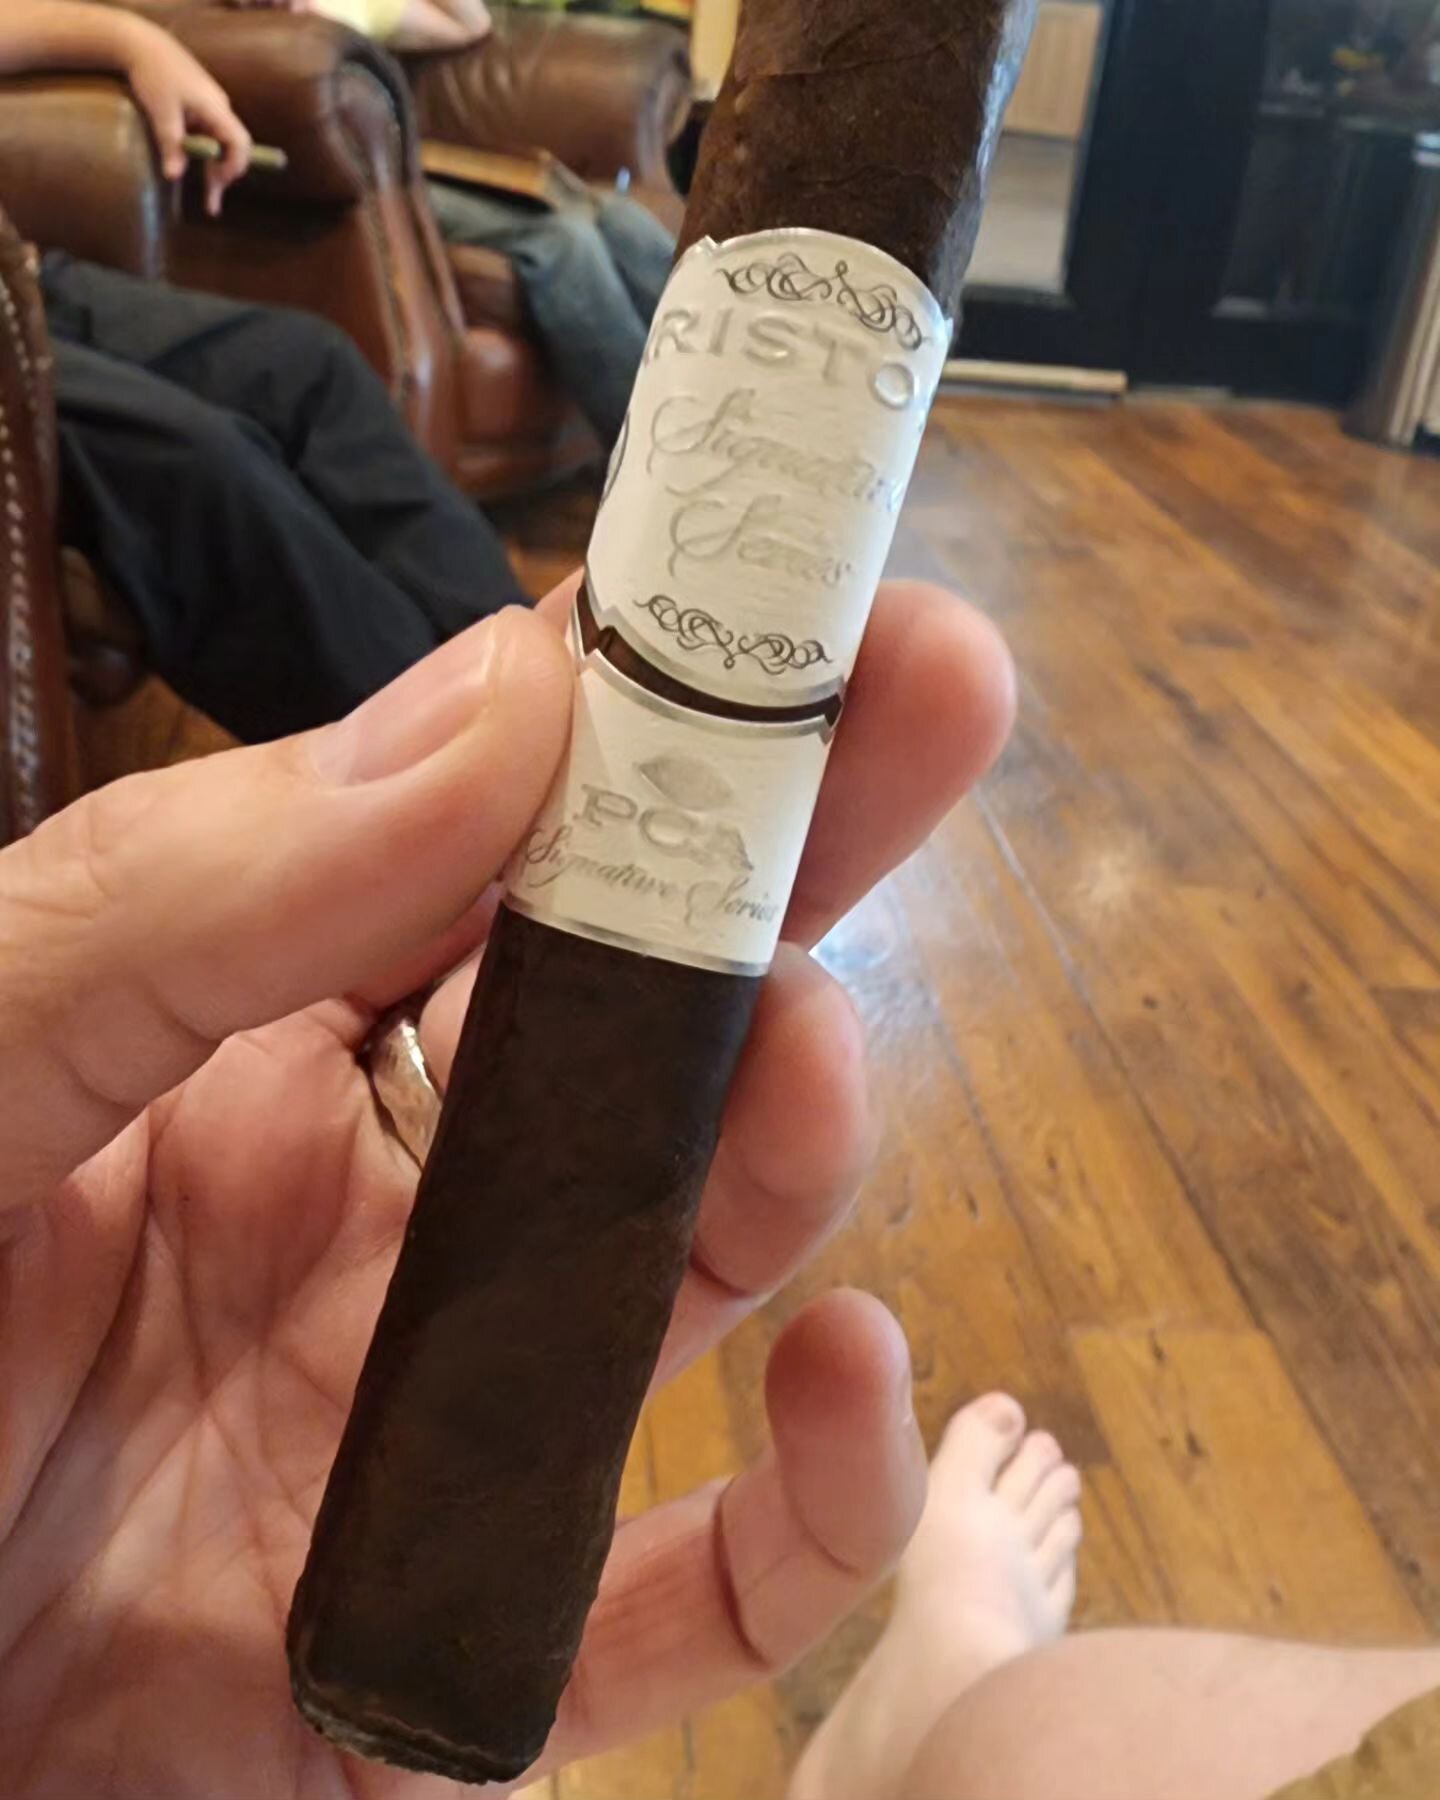 Trying a 2023 Kristoff Signature Series PCA release.